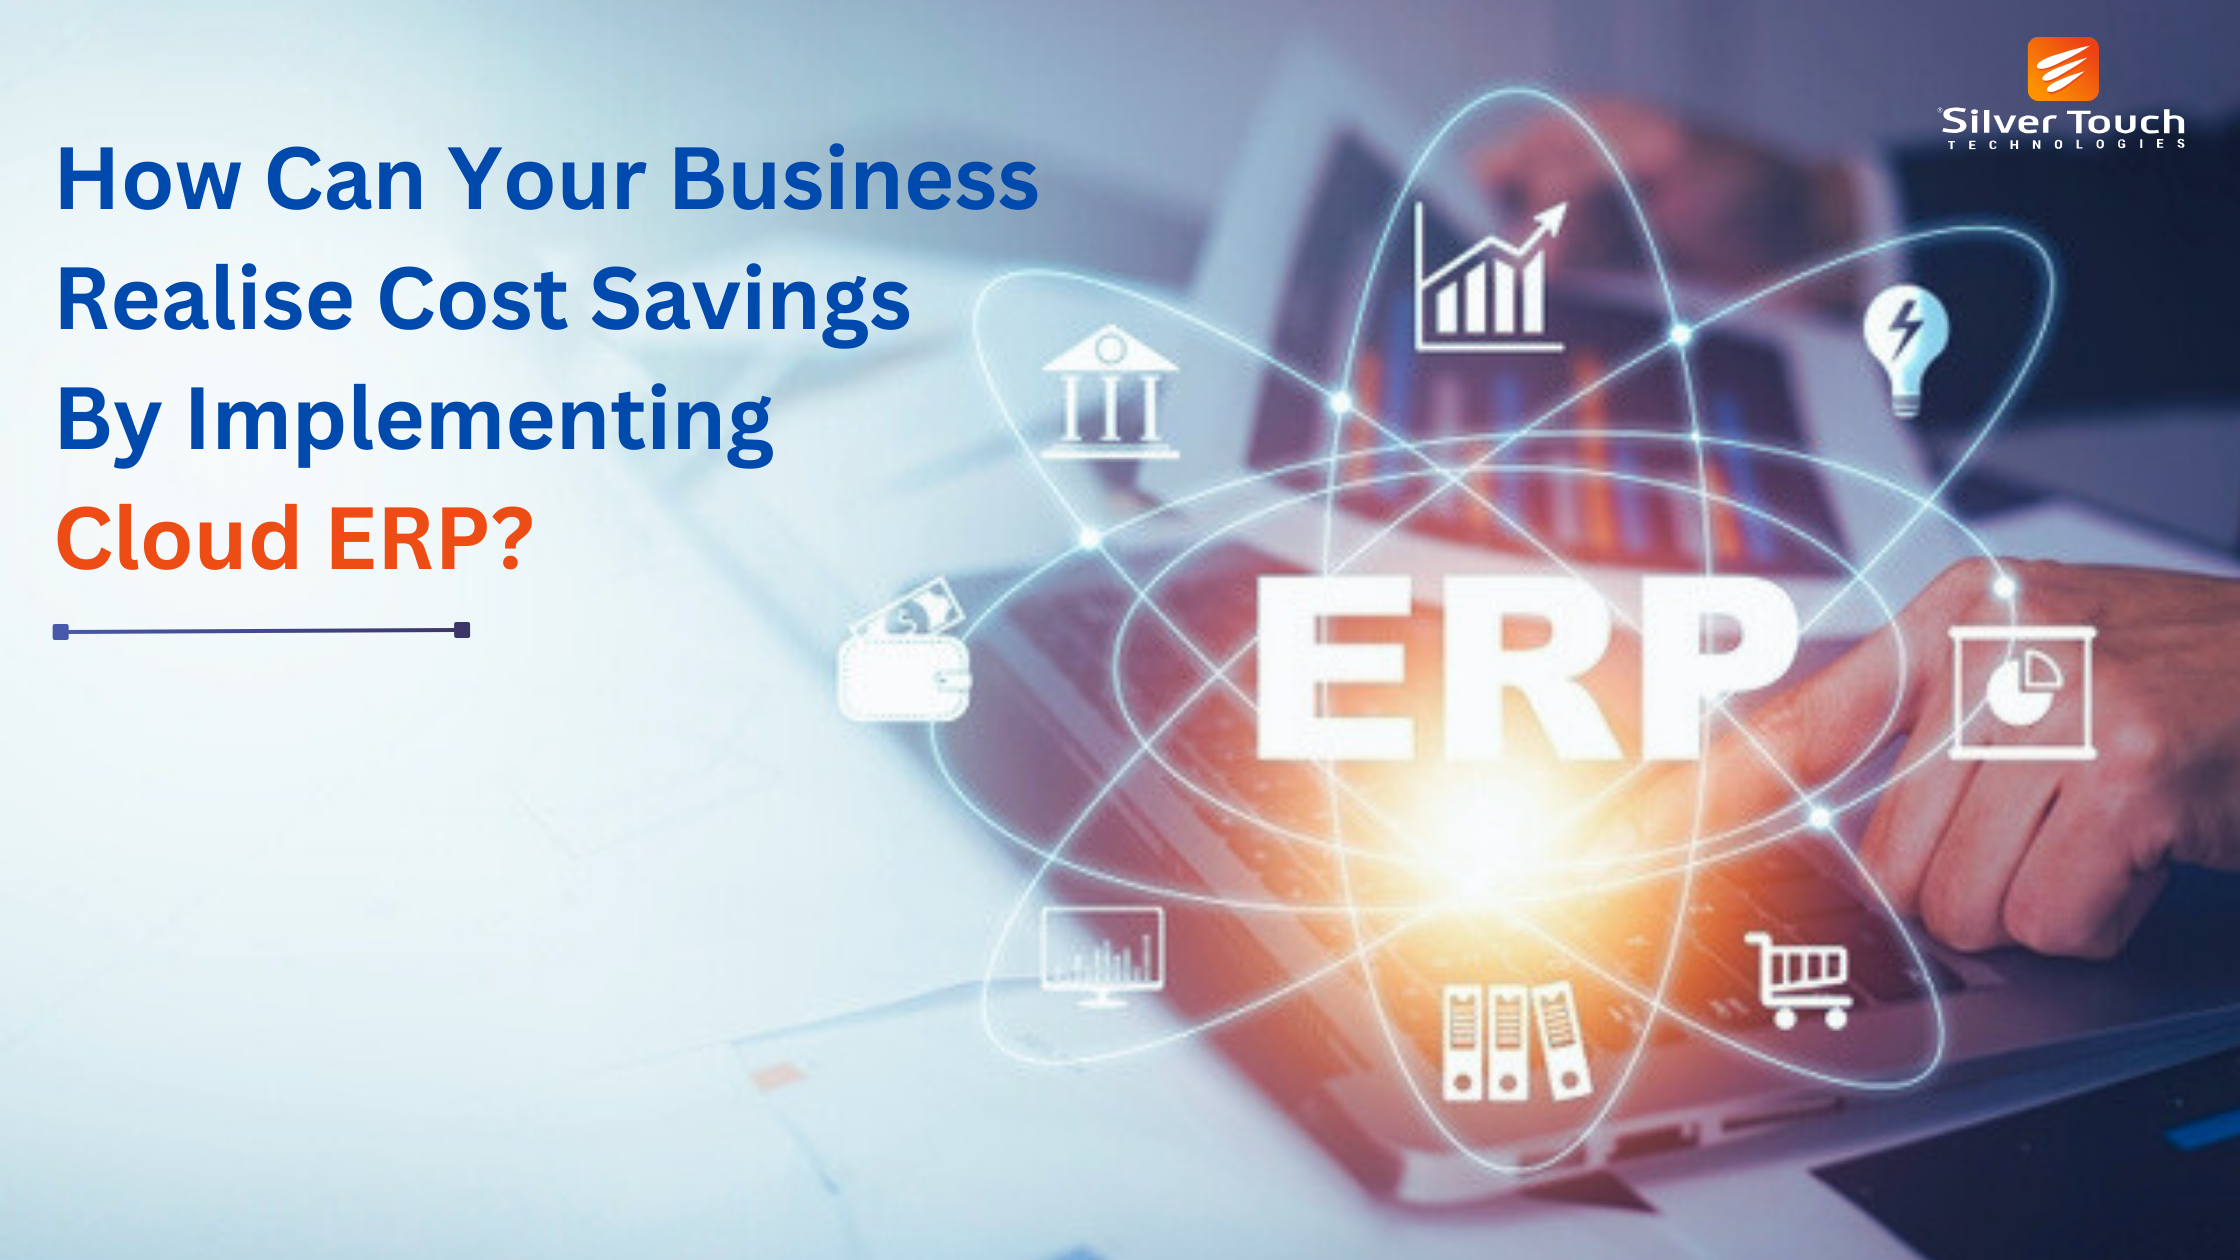 How Can Your Business Realise Cost Savings By Implementing Cloud ERP?